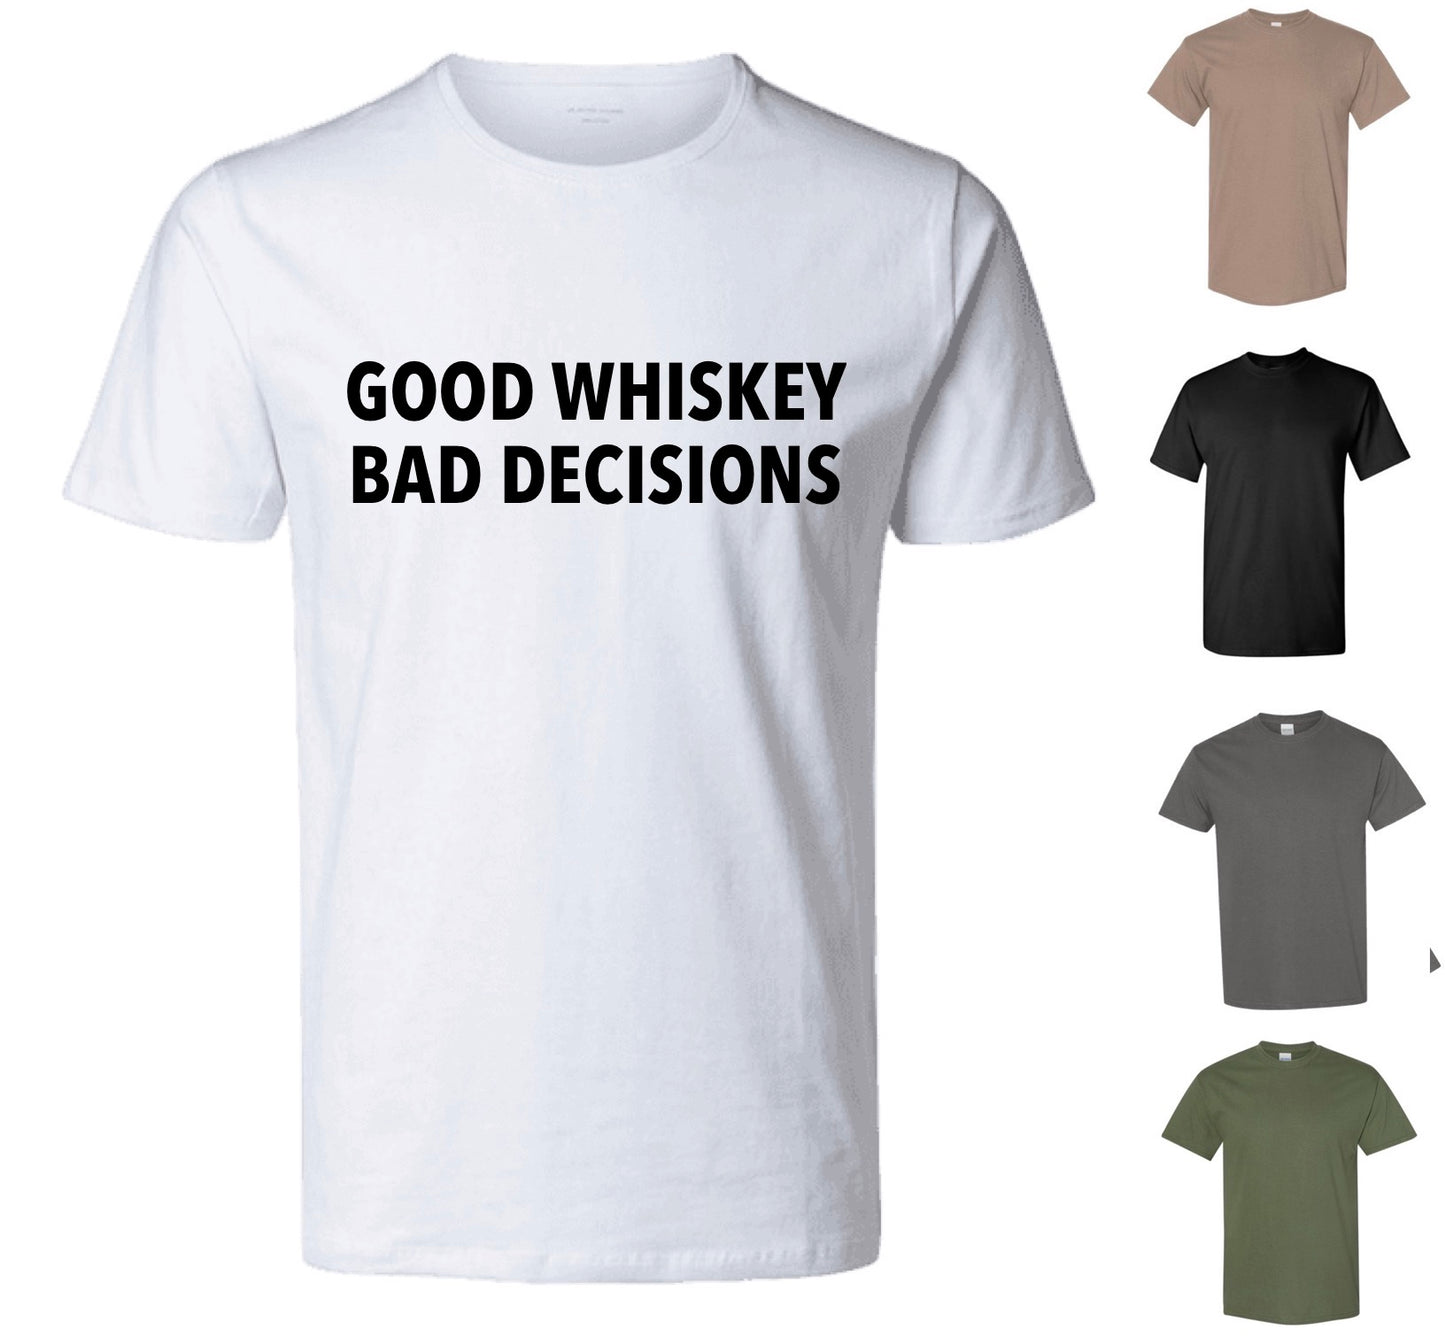 Good Whiskey Bad Decisions (FREE Shipping)